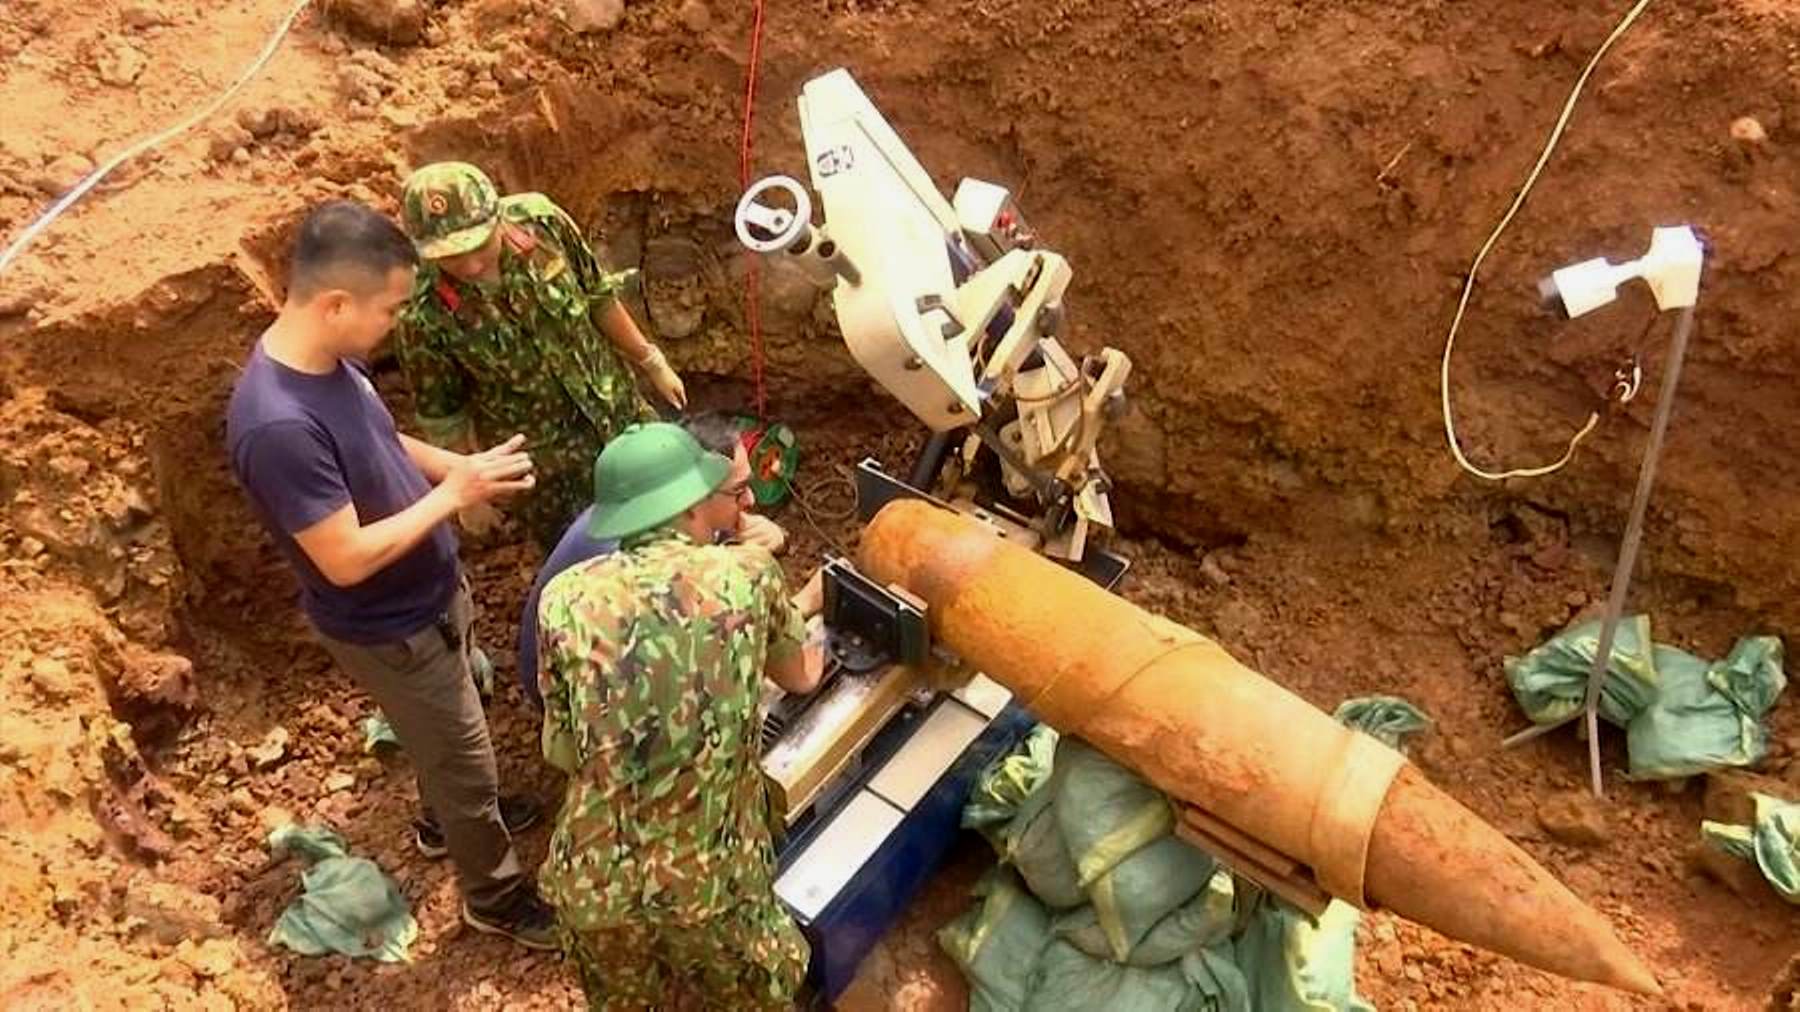 Authorities evacuate 100 households to defuse bomb in central Vietnam